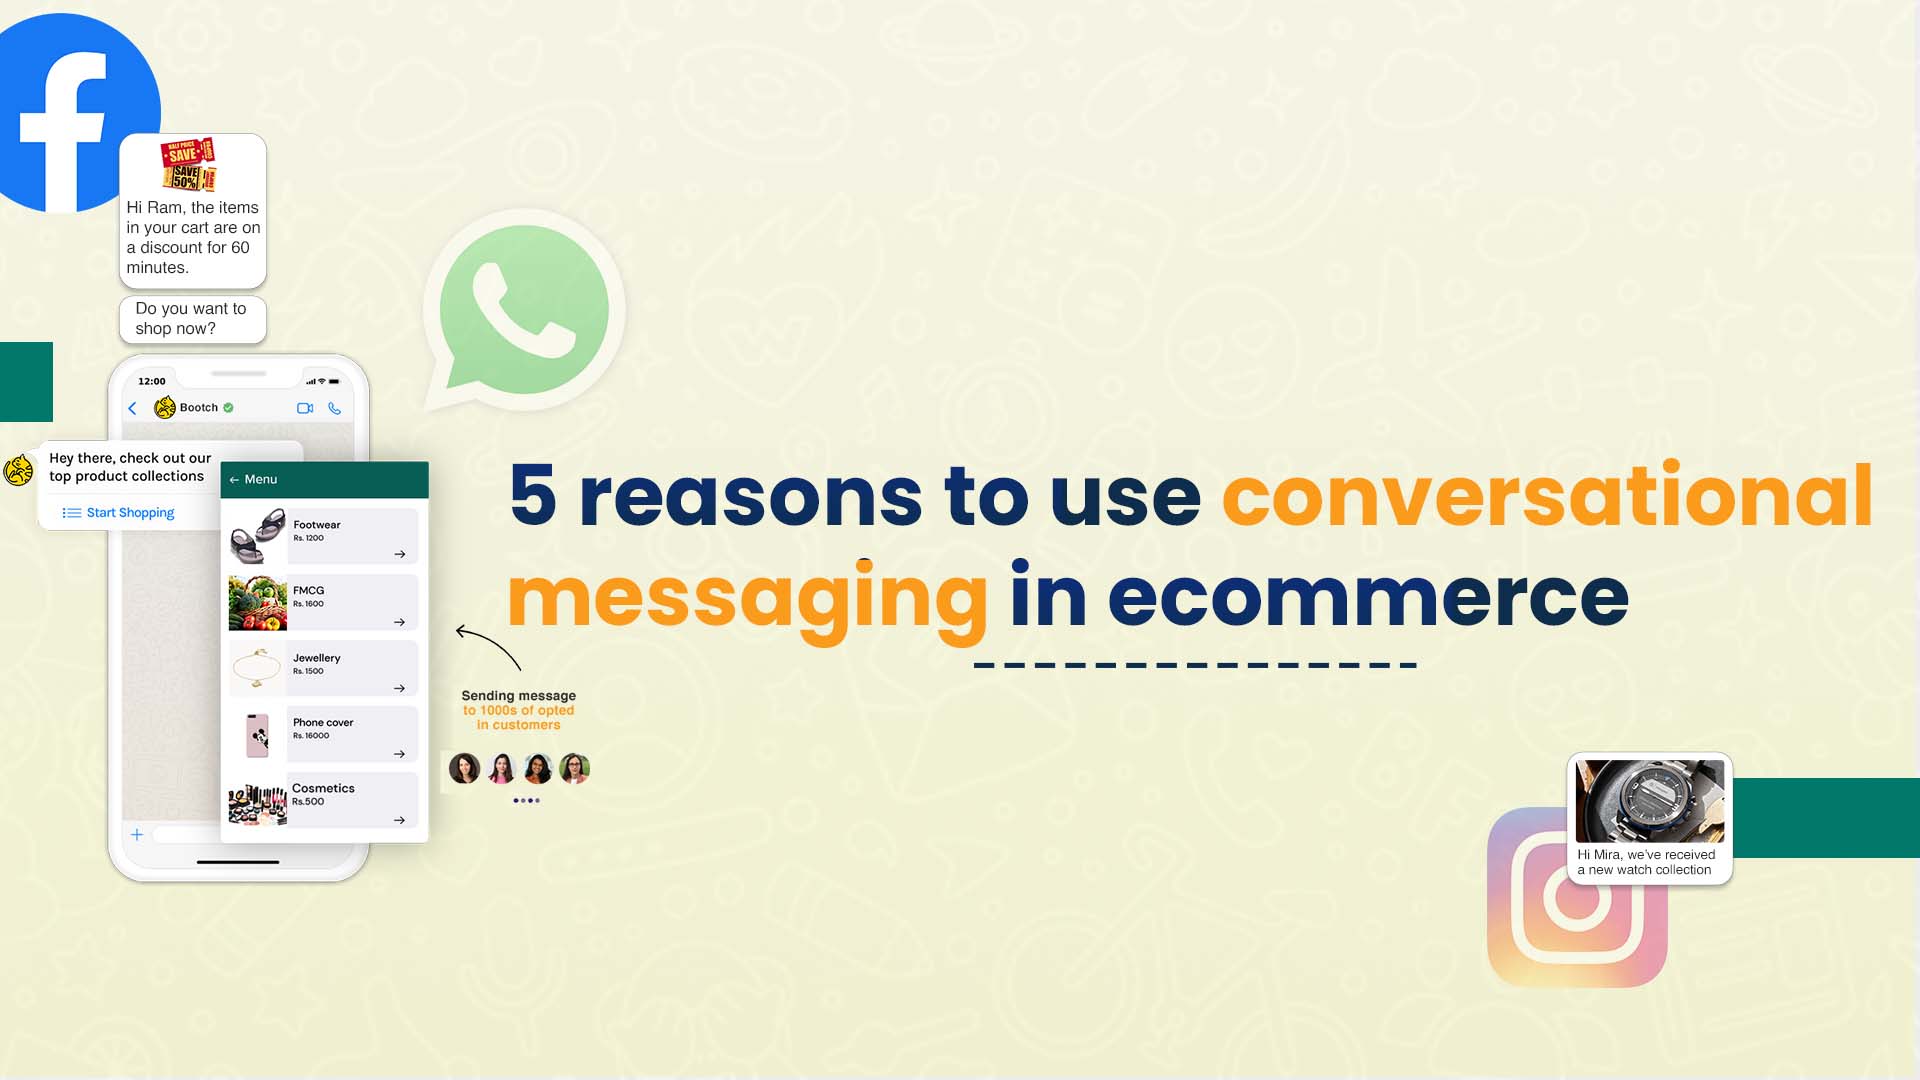 5 Reasons to use Conversational Messaging in E-commerce